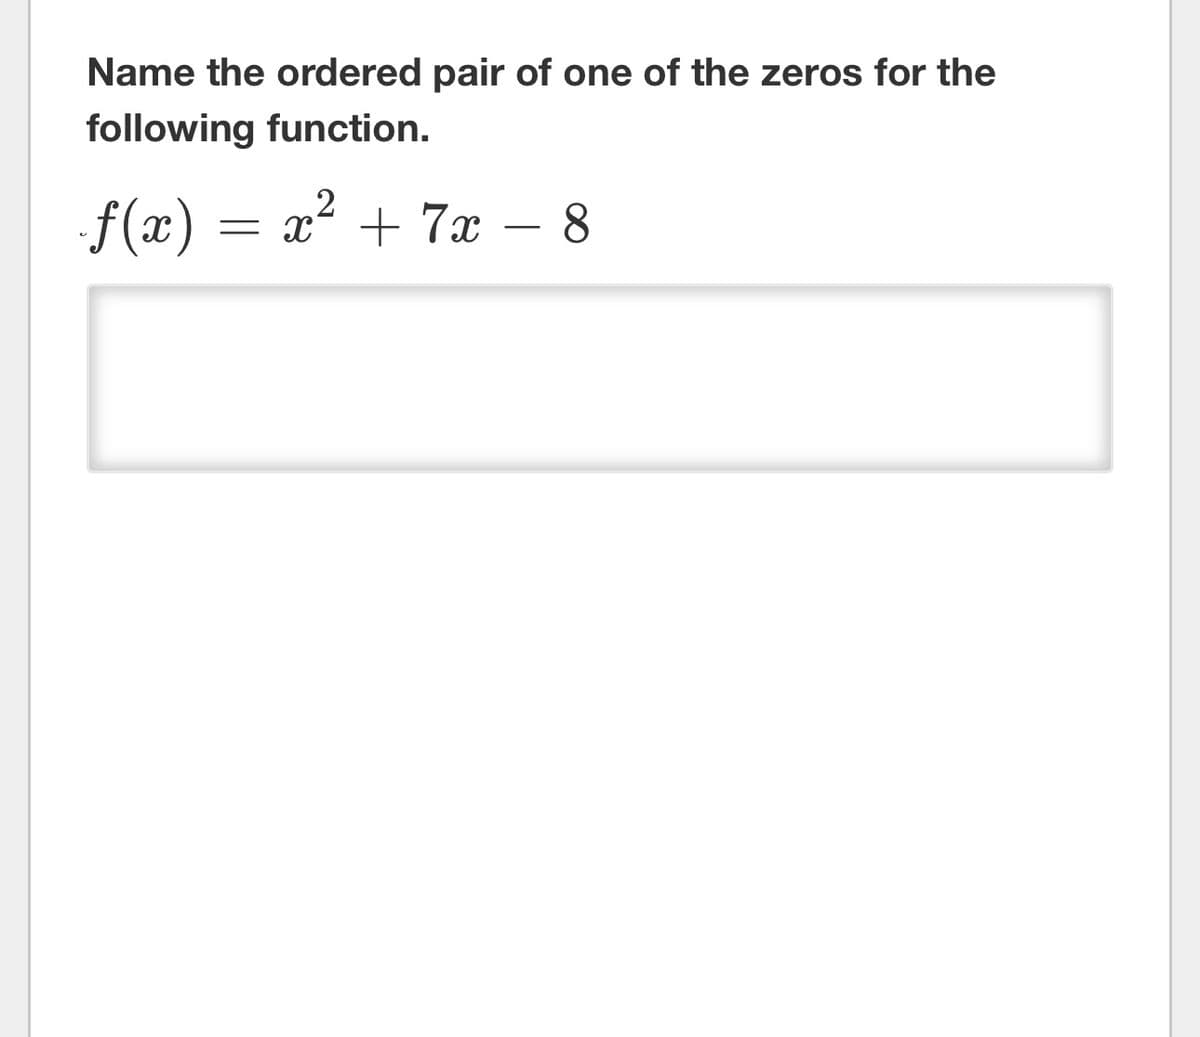 Name the ordered pair of one of the zeros for the
following function.
-f(x) = x² + 7x - 8